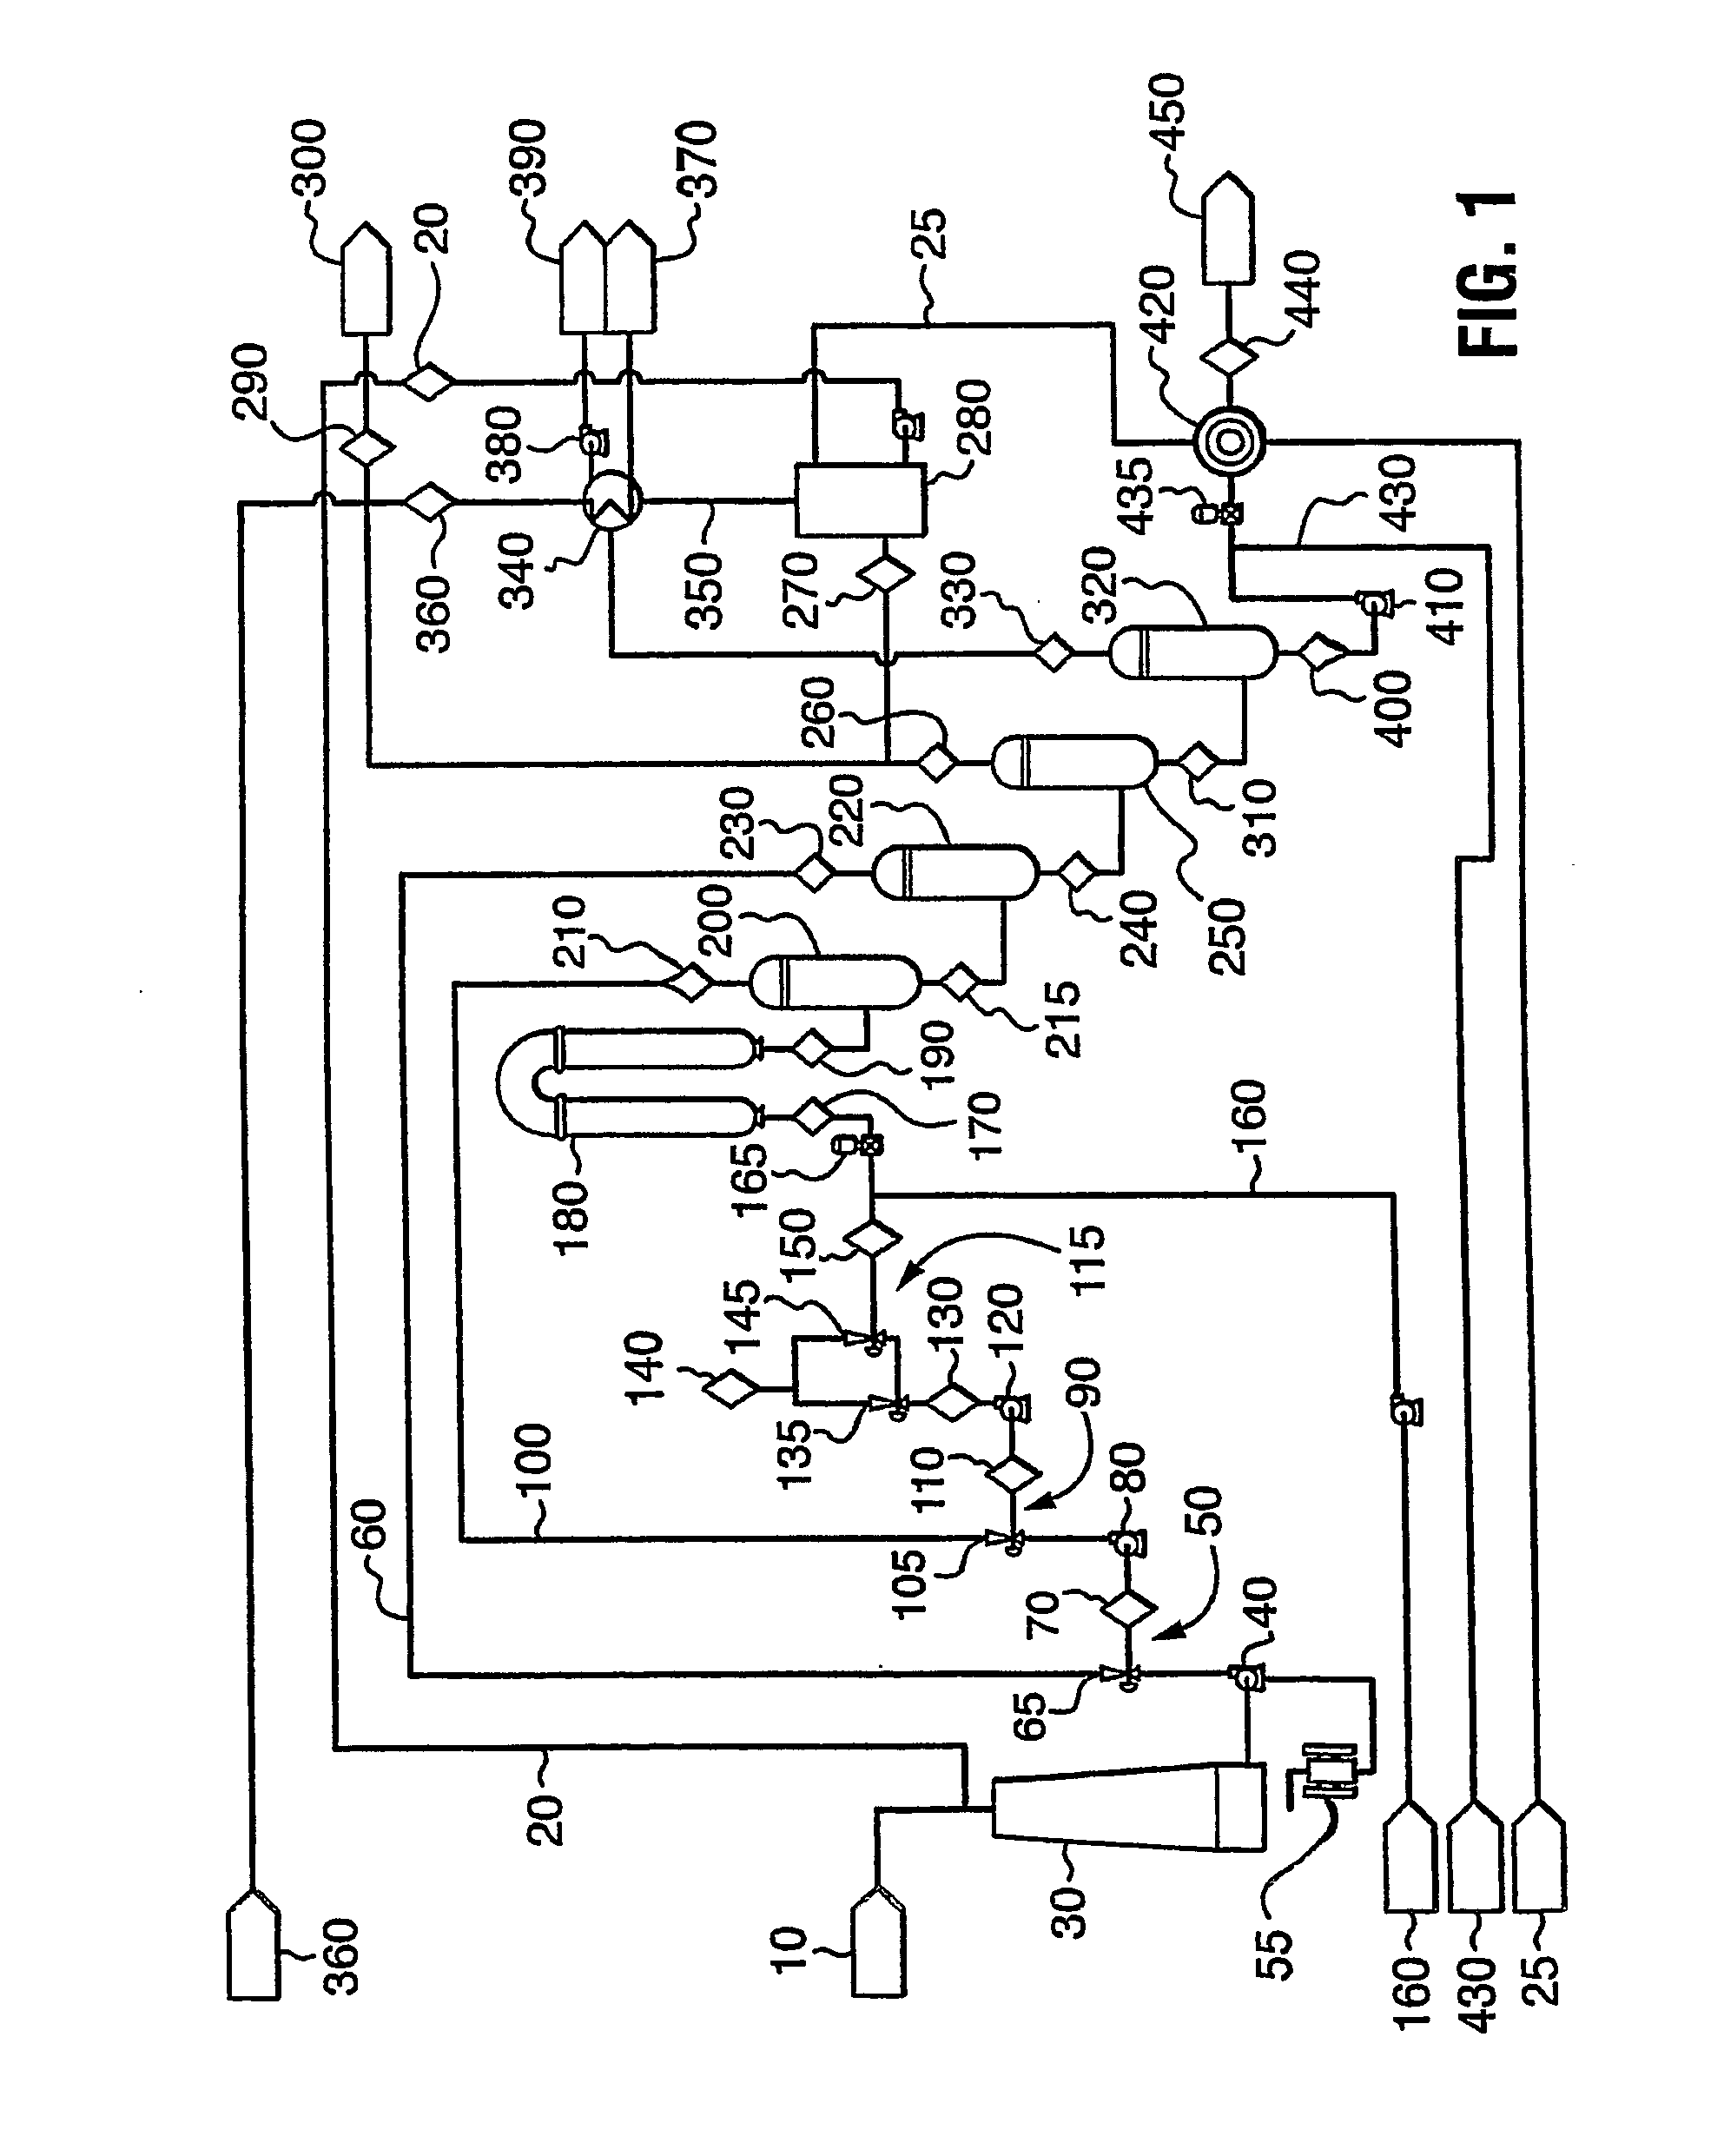 Continuous Flowing Pre-Treatment System with Steam Recovery